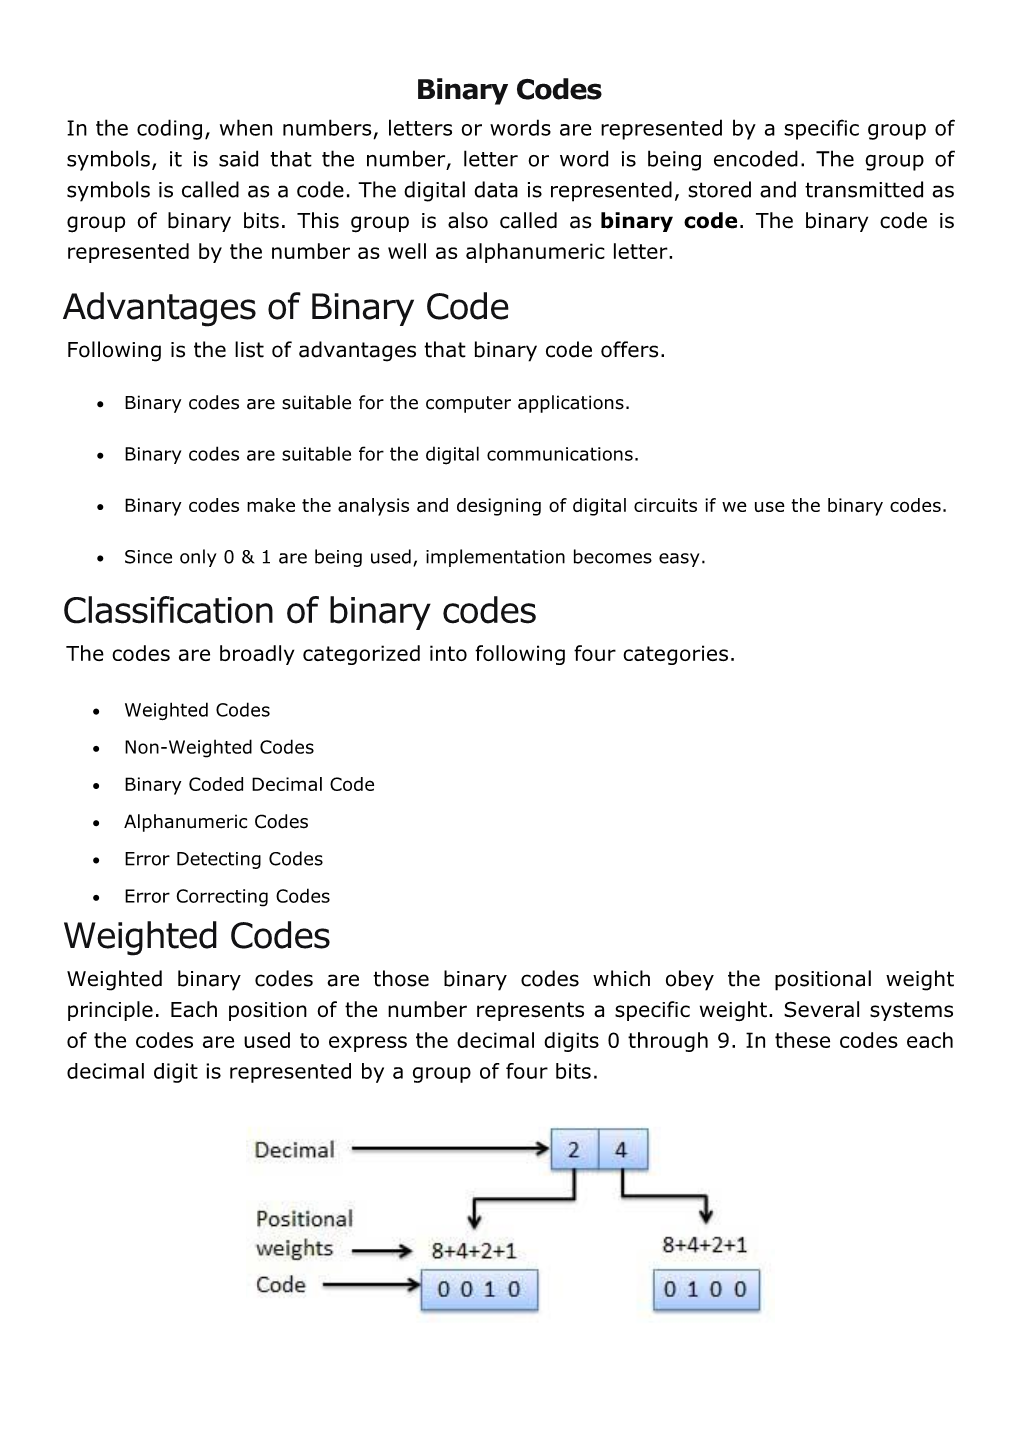 Binary Codes in the Coding, When Numbers, Letters Or Words Are Represented by a Specific Group of Symbols, It Is Said That the Number, Letter Or Word Is Being Encoded